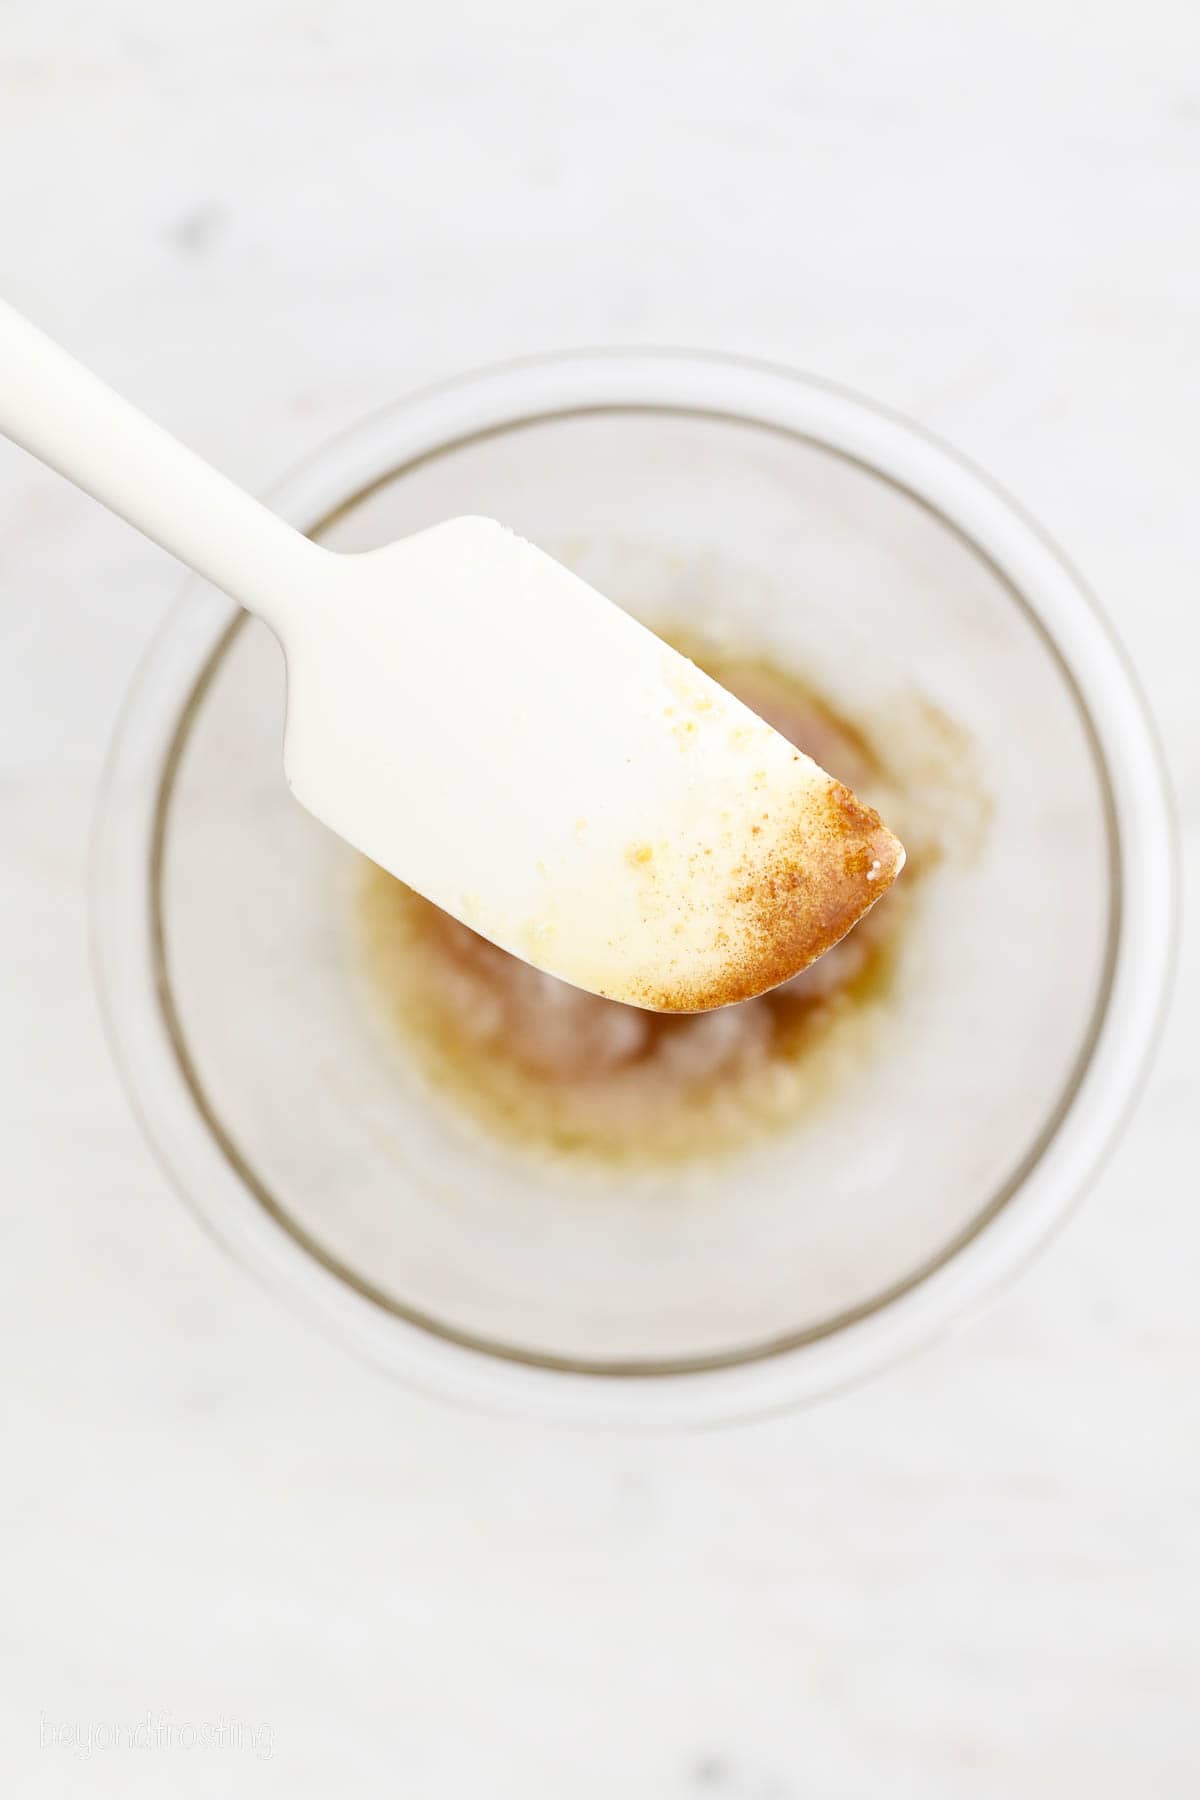 Close up of a white rubber spatula held up to show brown flecks of toasted milk solids over a bowl of brown butter.